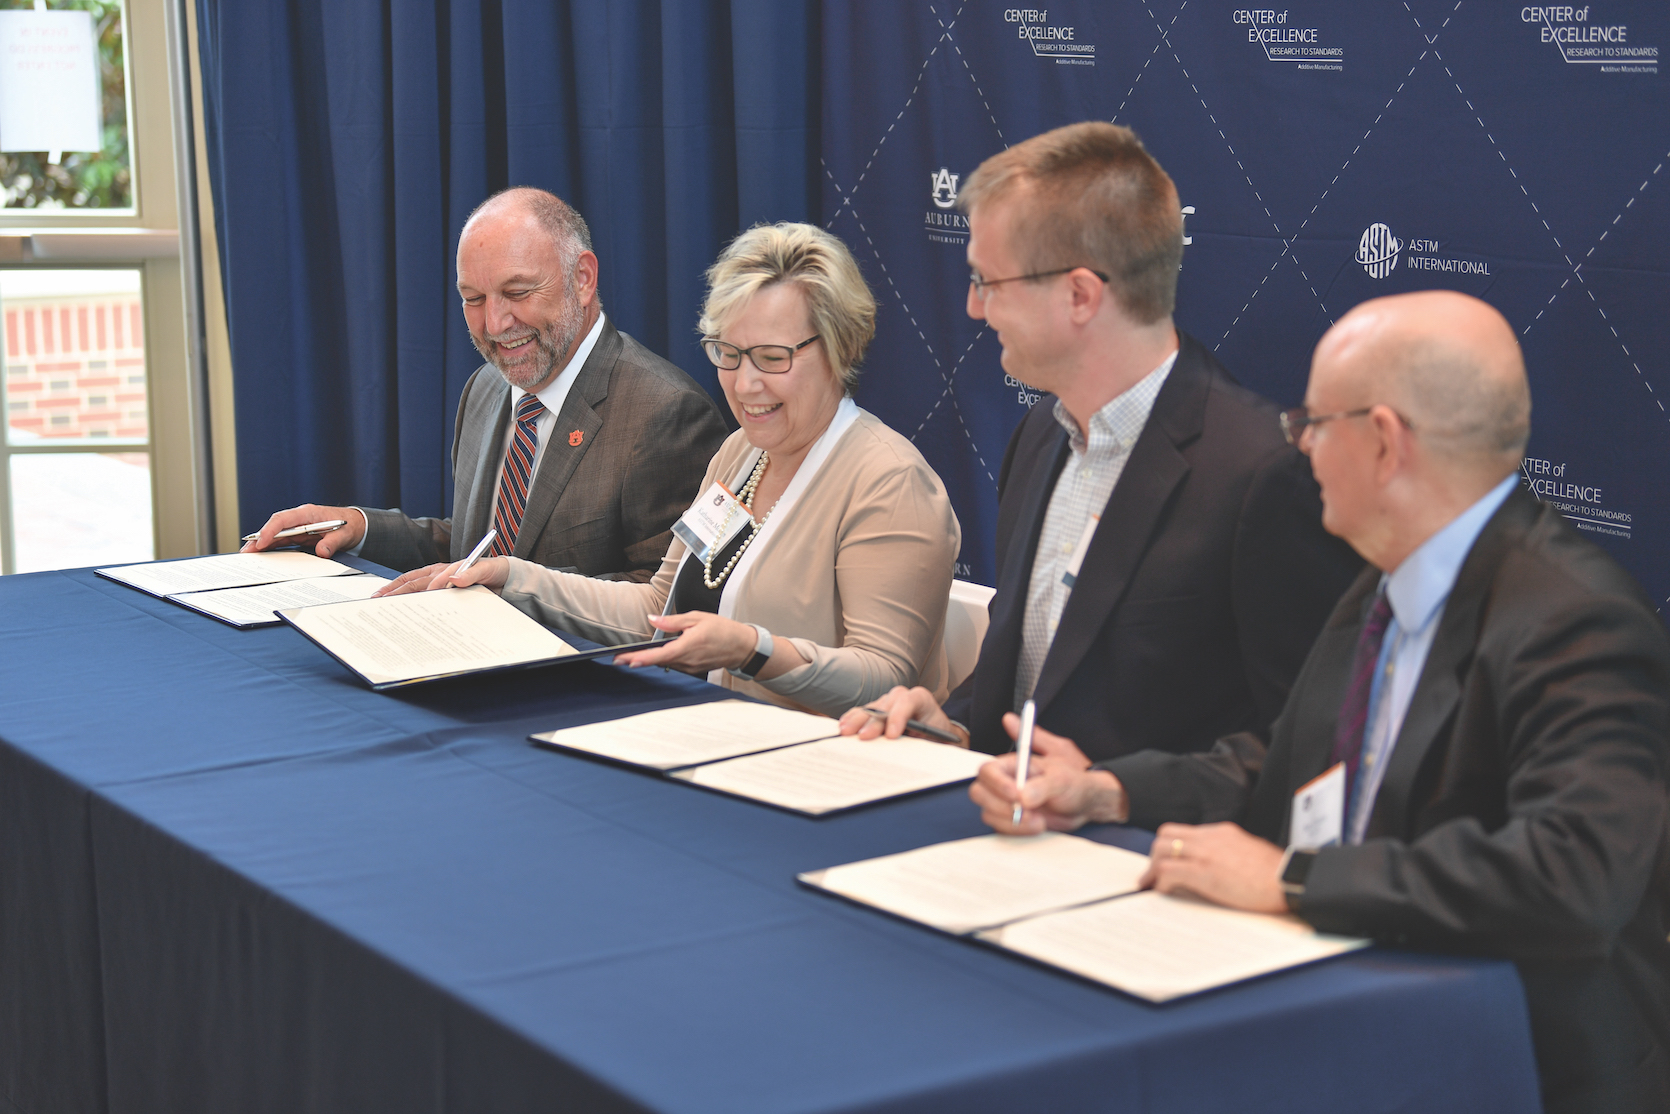 Participants signing the ASTM International Additive Manufacturing Center of Excellence Statement on Cooperative Agreement. From left: Auburn University President Steven Leath; ASTM International President Katharine Morgan; Alex Kitt, Product Manager, EWI Buffalo Manufacturing Works; and Benjamin Dutton, Manufacturing Technology Centre.